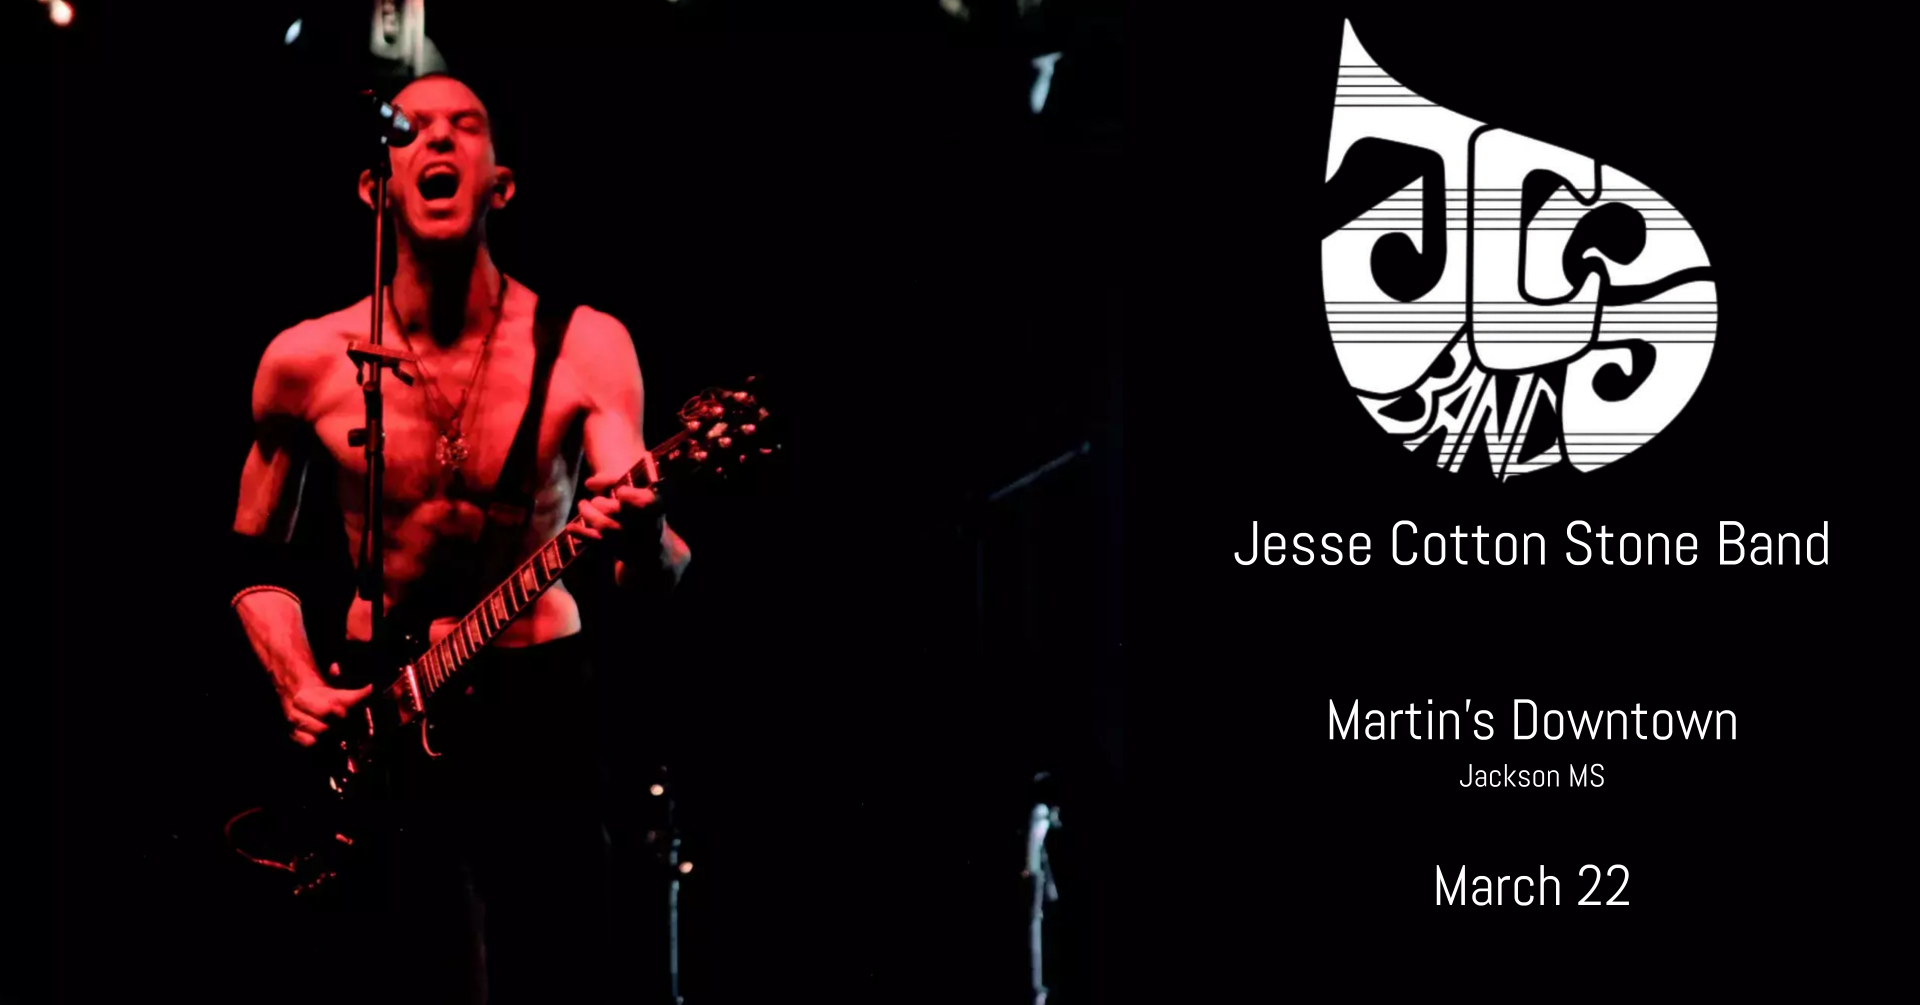 Jesse Cotton Stone Band Live at Martin’s Downtown